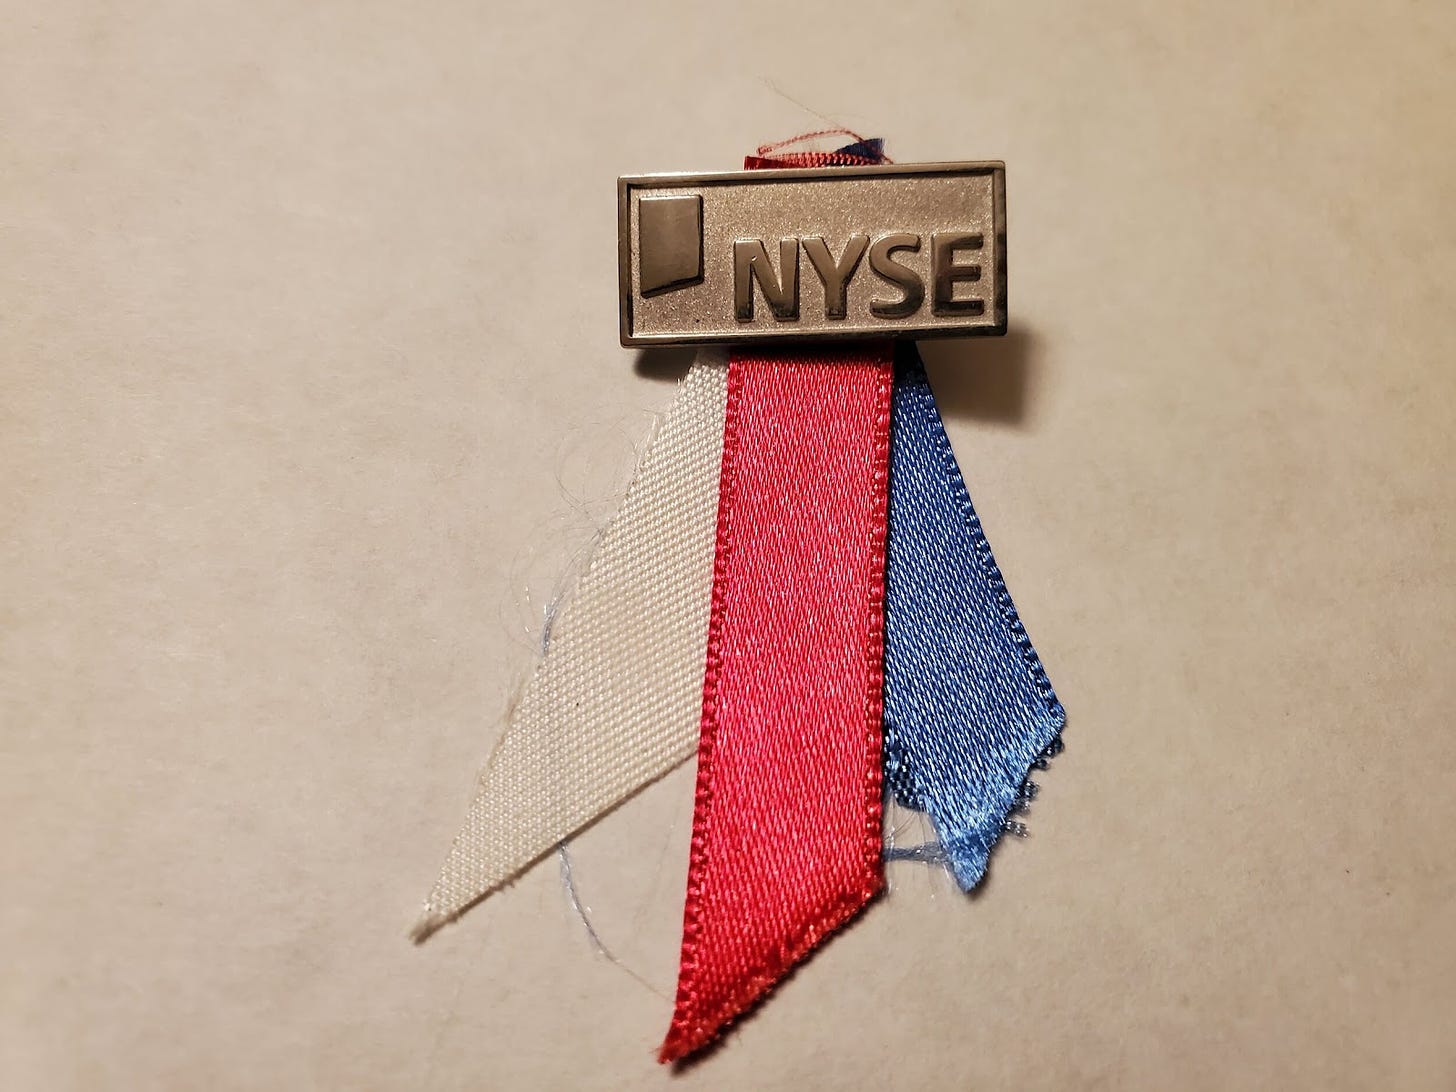 There was not enough time to create special lapel pins, so our events colleagues affixed ribbons to thousands of exchange pins so that everyone could wear the colors when the markets reopened on Sept. 17.